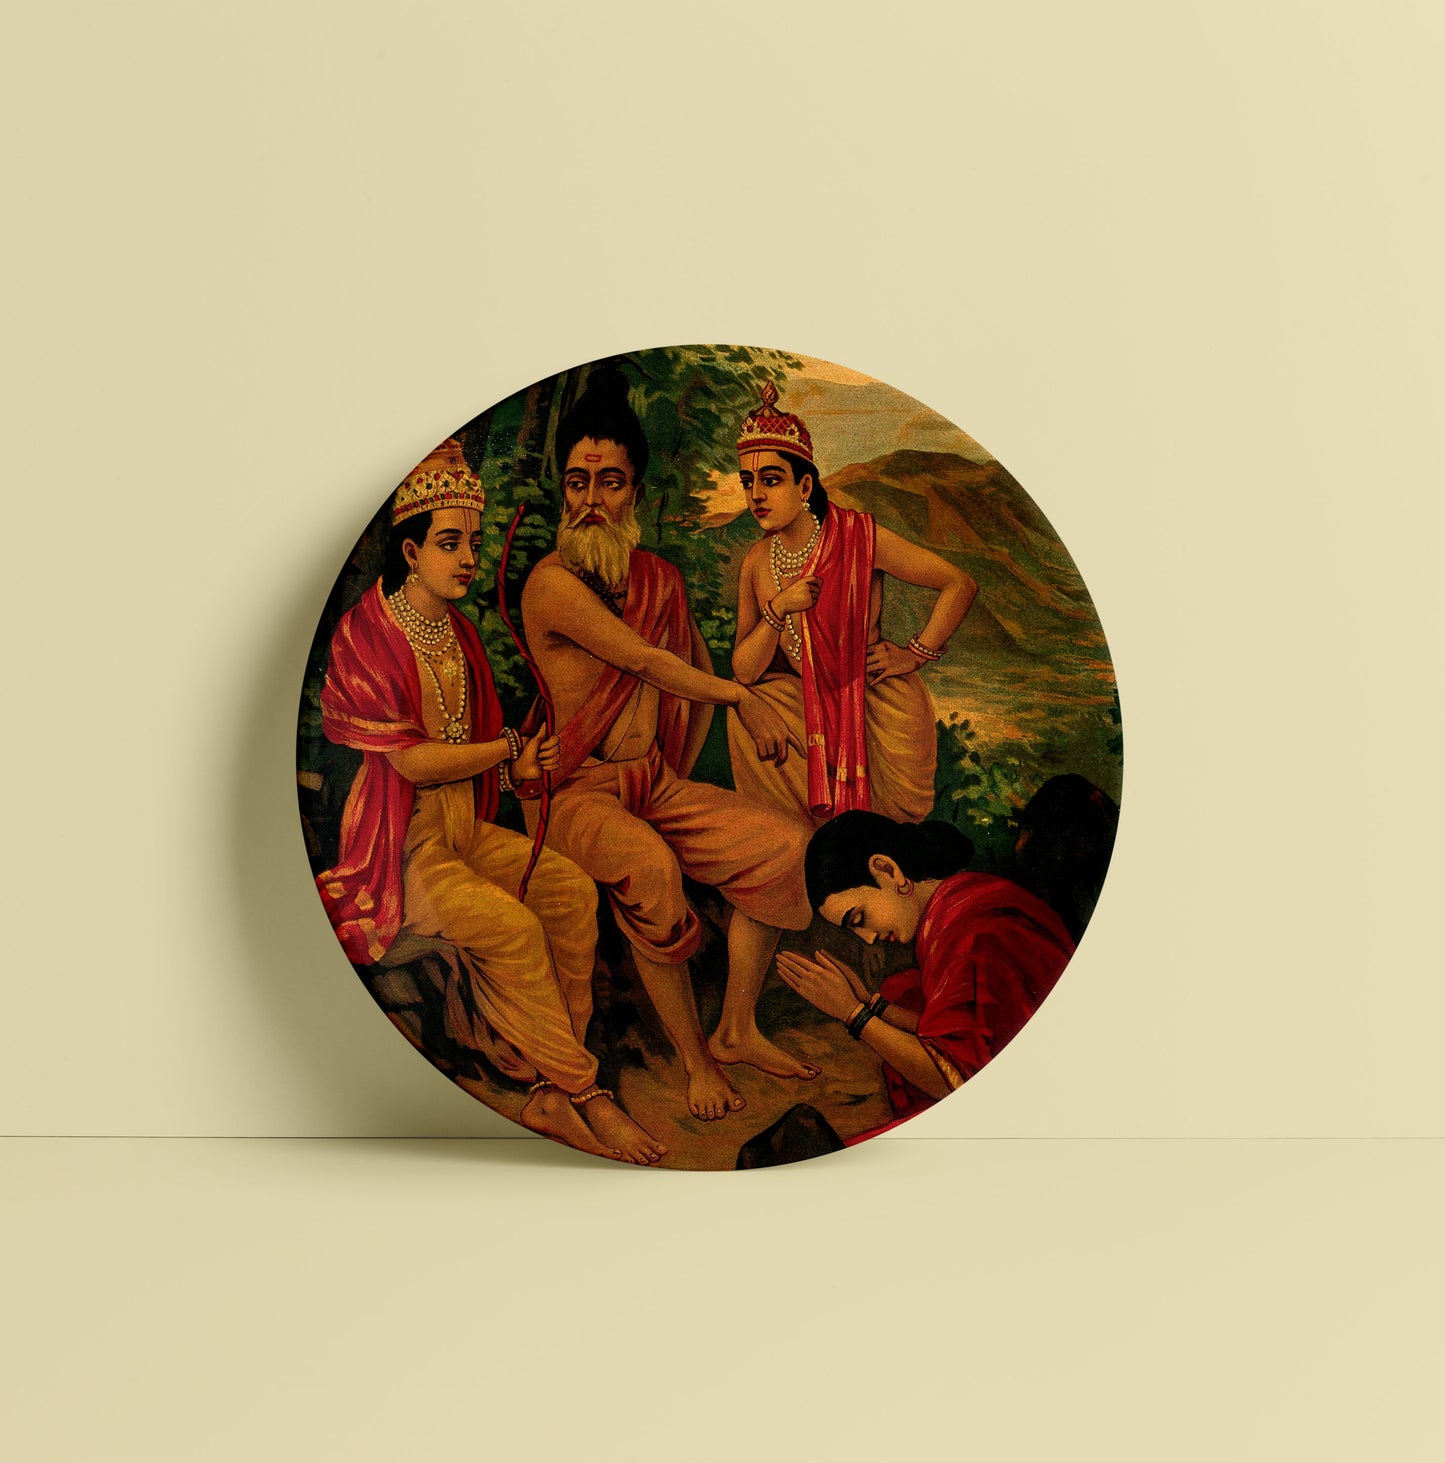 Ahalya the nymph being released from a curse by Rama & Lakshman by Ravi Varma Ceramic Plate for Home Decor